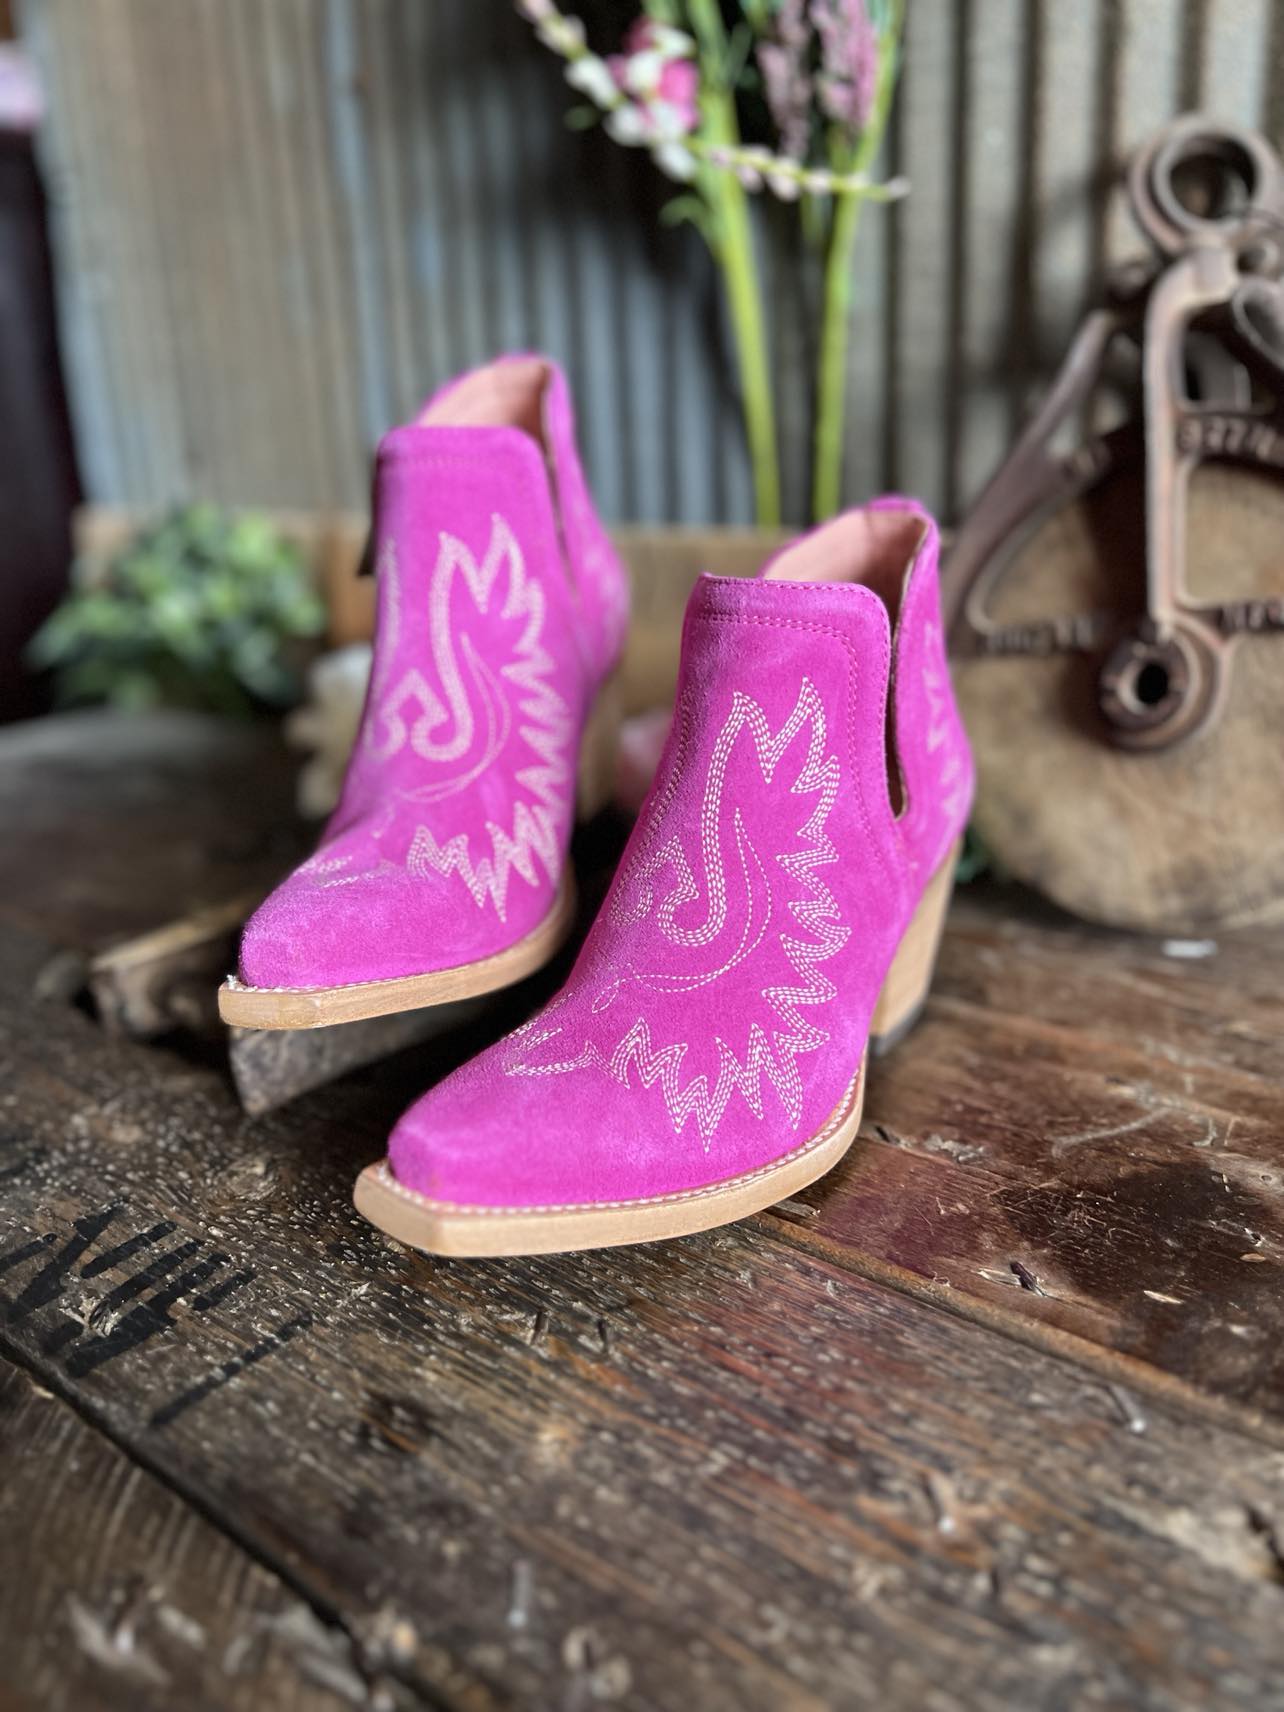 Womens Ariat Dixon Bootie In Haut Pink-Women's Booties-Ariat-Lucky J Boots & More, Women's, Men's, & Kids Western Store Located in Carthage, MO